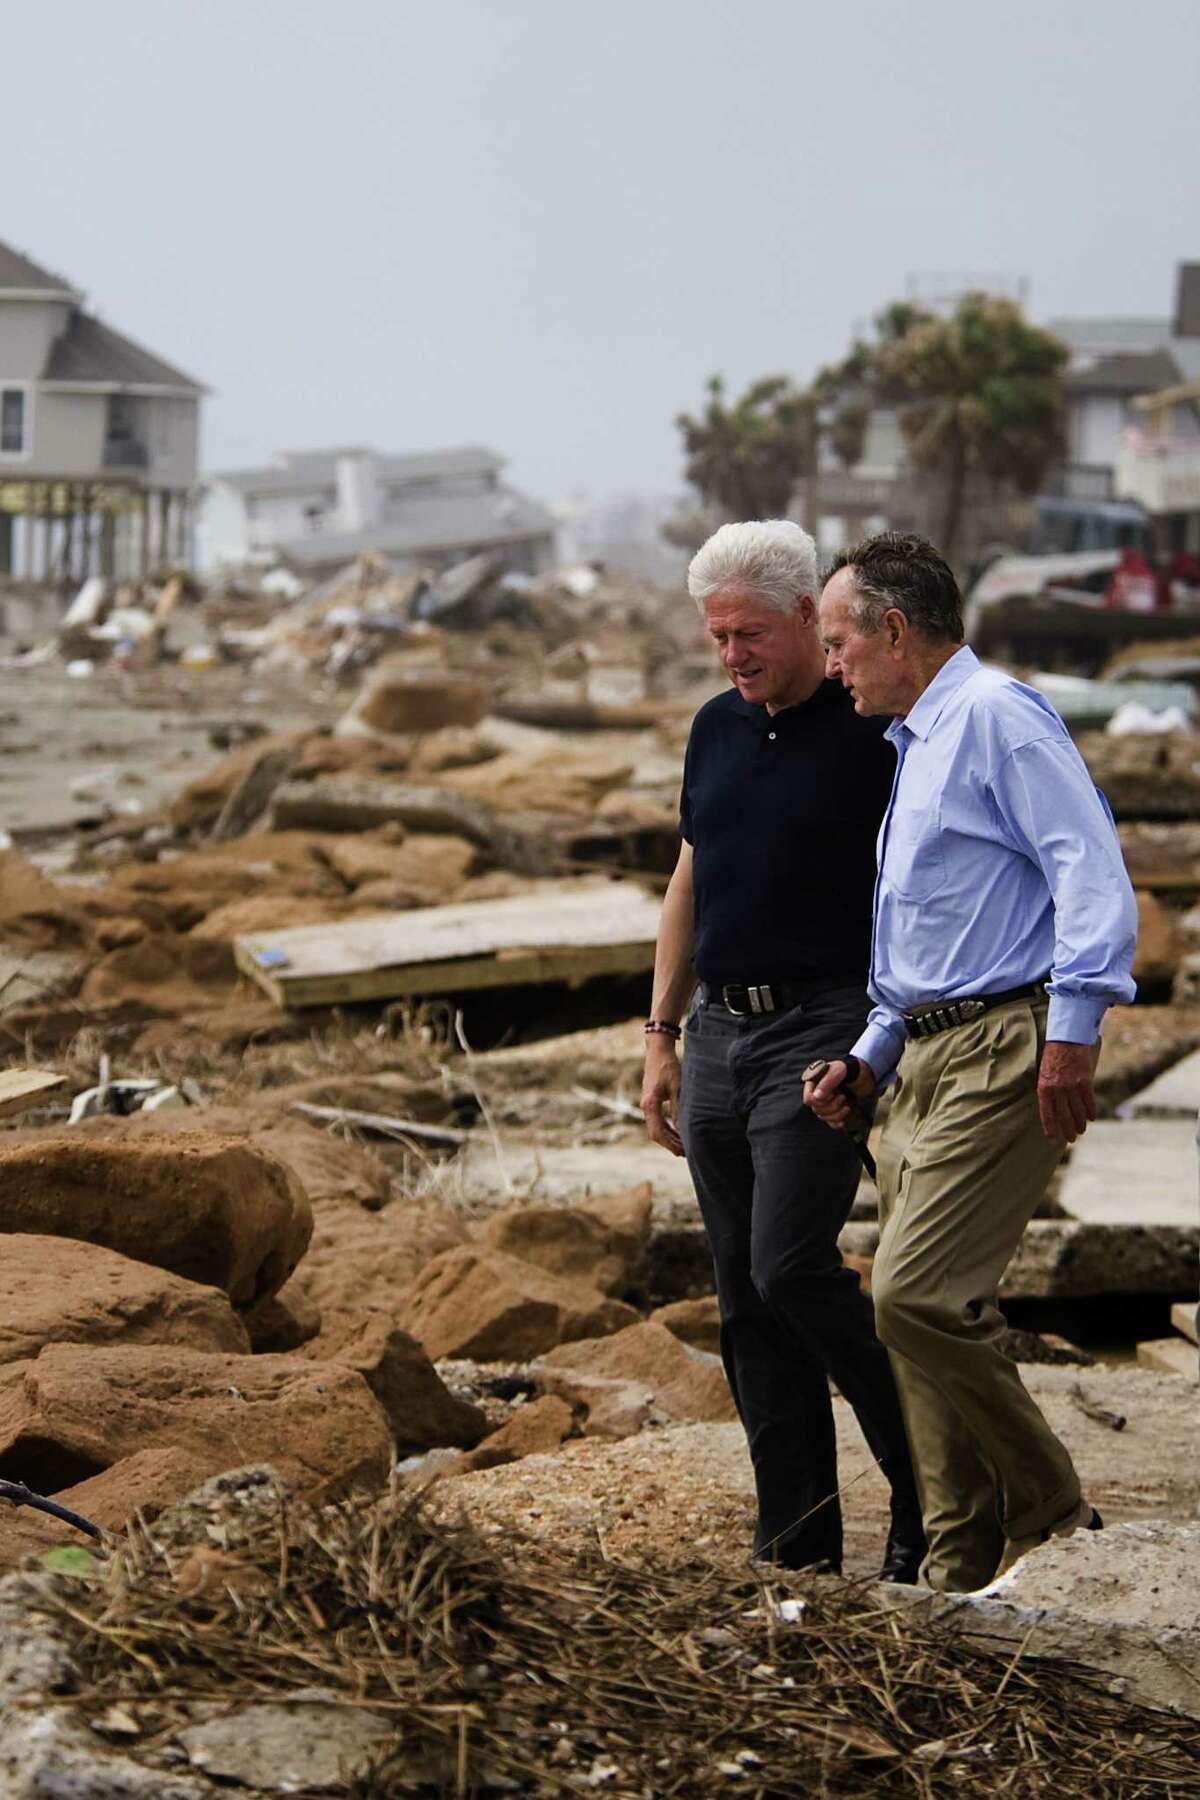 Former U.S. Presidents George H.W. Bush, right, and Bill Clinton walk through debris at Bermuda Beach on Galveston Island as they toured areas affected by Hurricane Ike in this photo from Oct. 14, 2008.